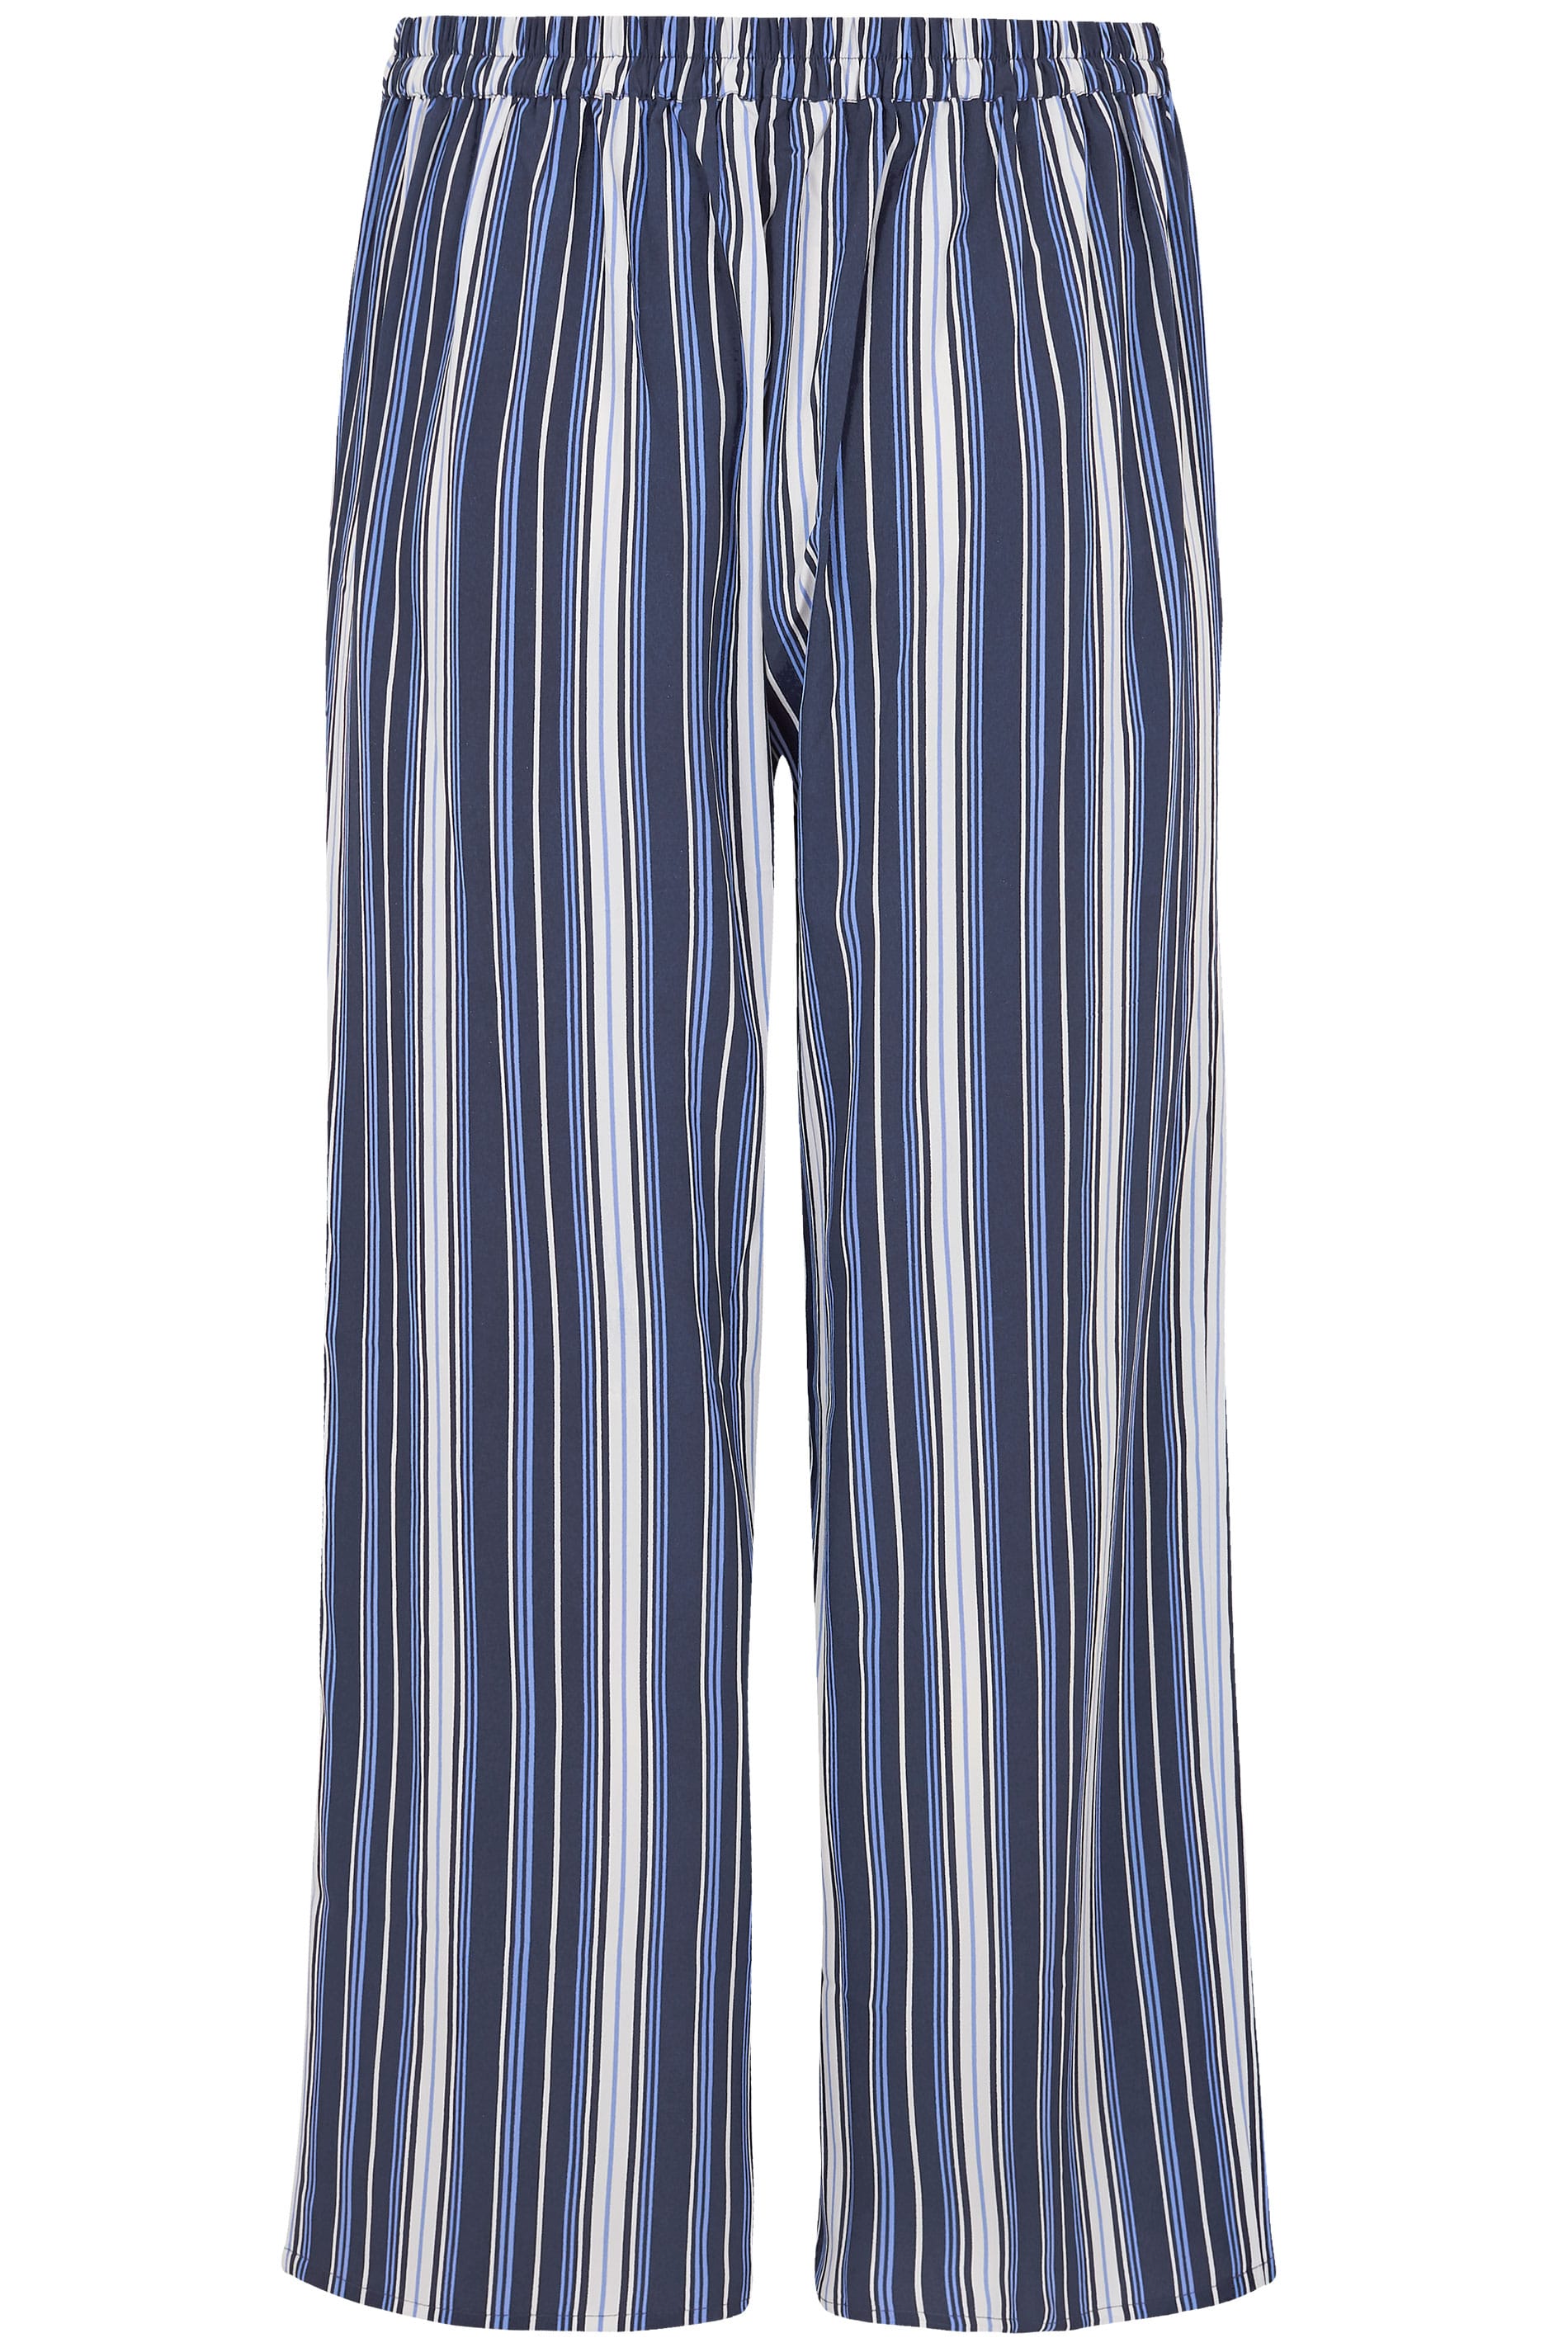 Plus Size YOURS LONDON Blue Stripe Wide Leg Trousers | Sizes 16 to 32 ...